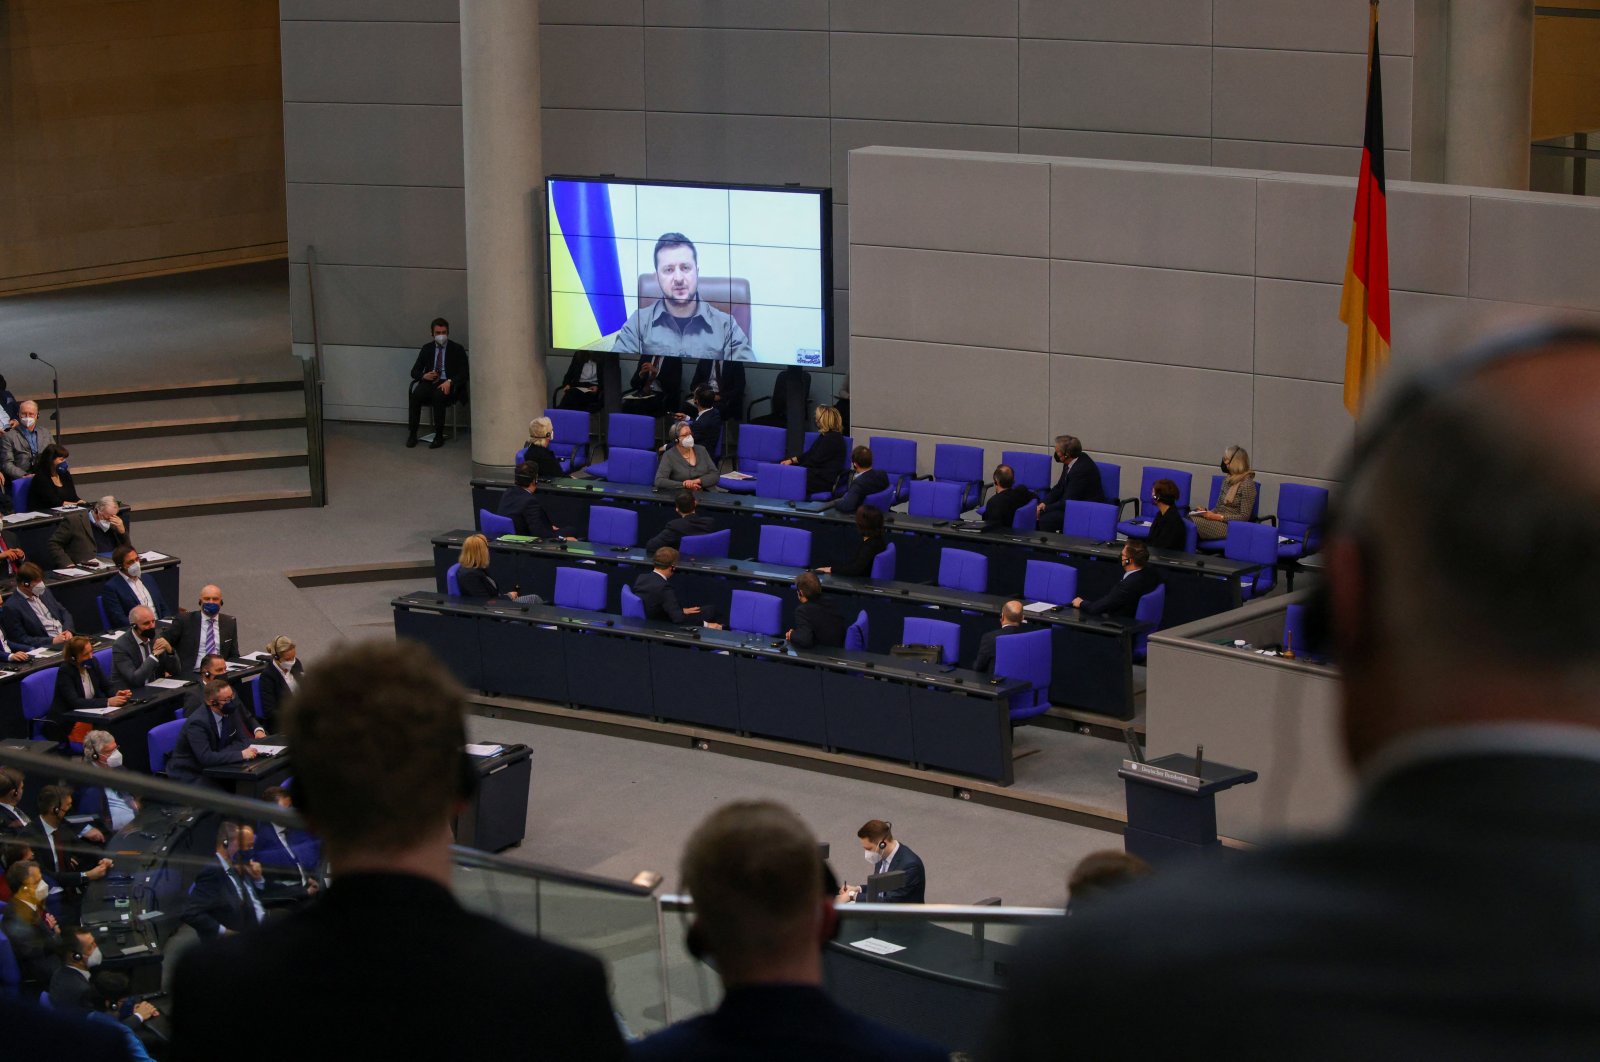 Ukraine&#039;s President Volodymyr Zelenskyy addresses Germany&#039;s lower house of parliament, the Bundestag, via videolink, after Russia&#039;s invasion of Ukraine, in Berlin, Germany, March 17, 2022. (Reuters Photo)